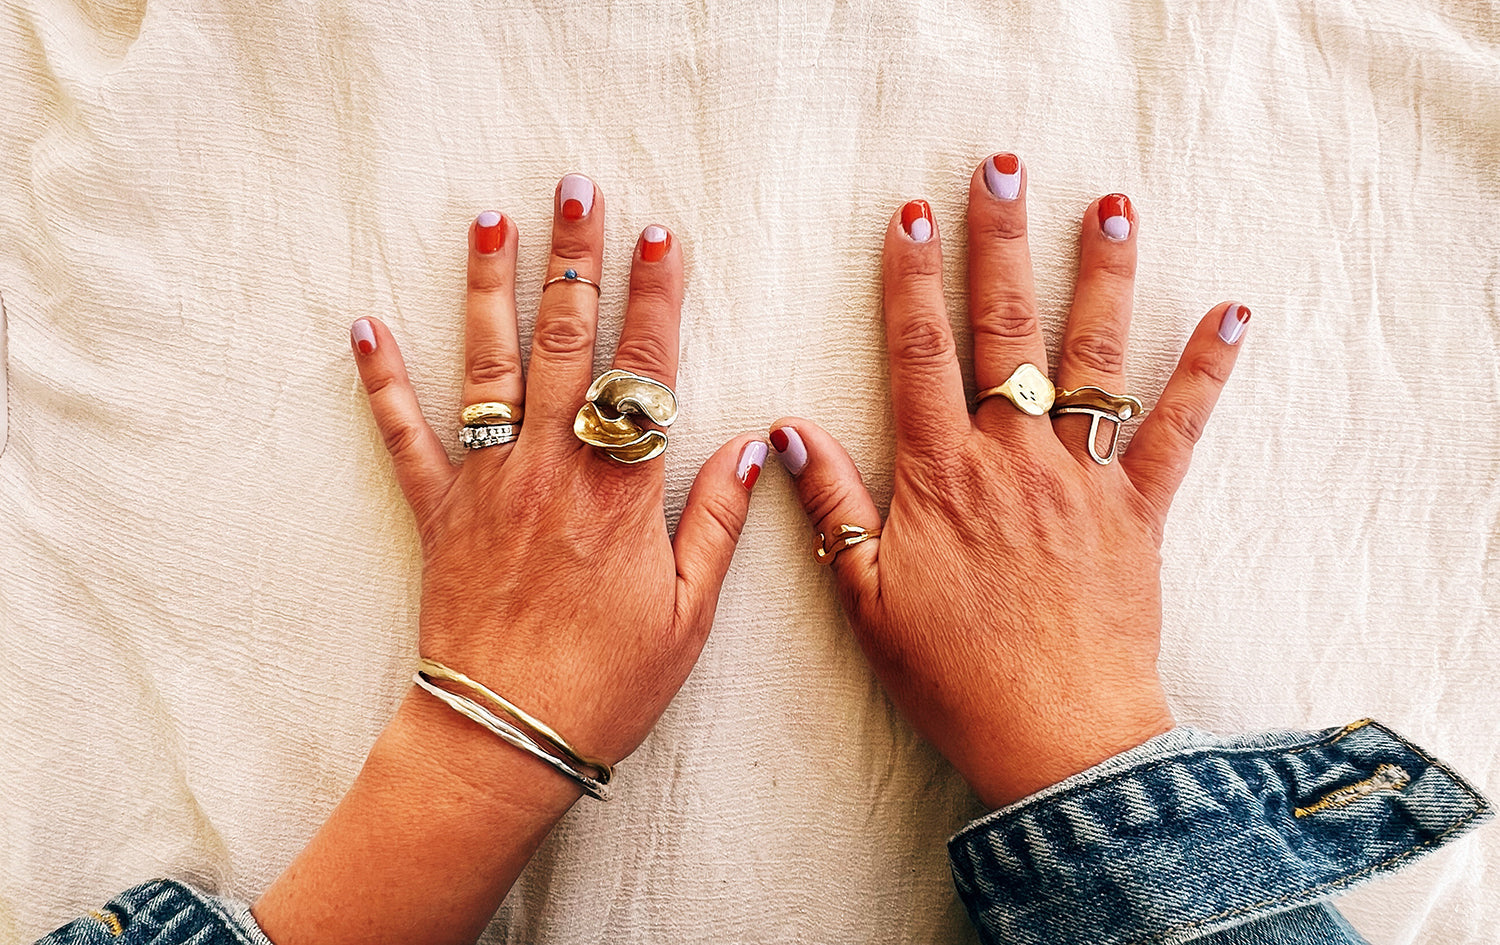 two hands on a cream colored cloth wearing several rings and sporting colorful polish, and a couple of bangle bracelets